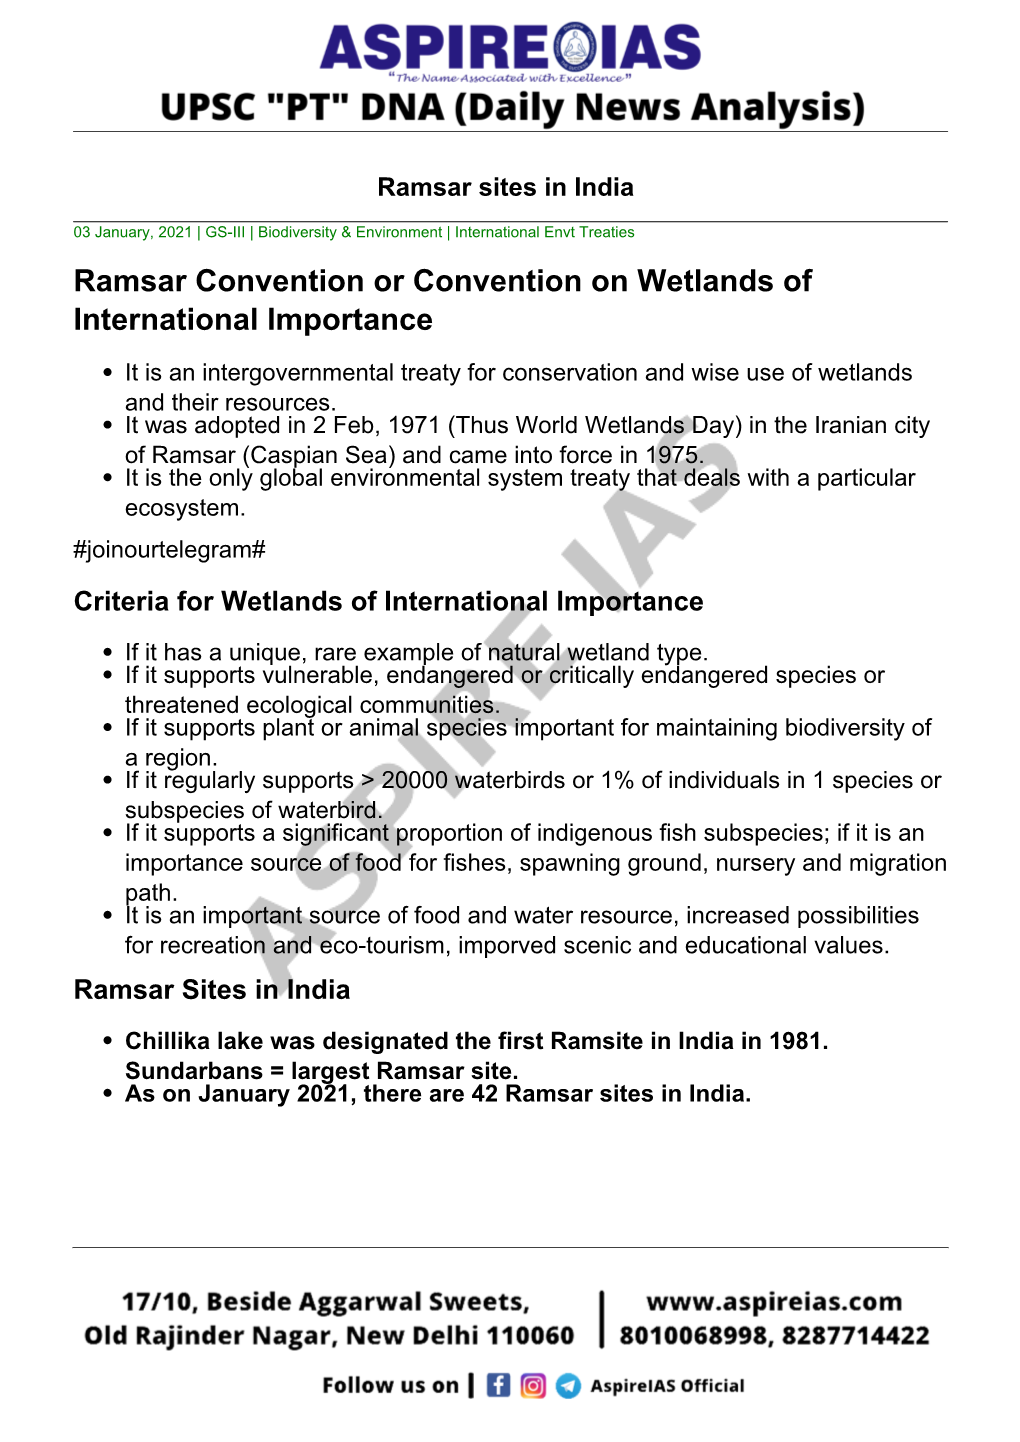 Ramsar Convention Or Convention on Wetlands of International Importance